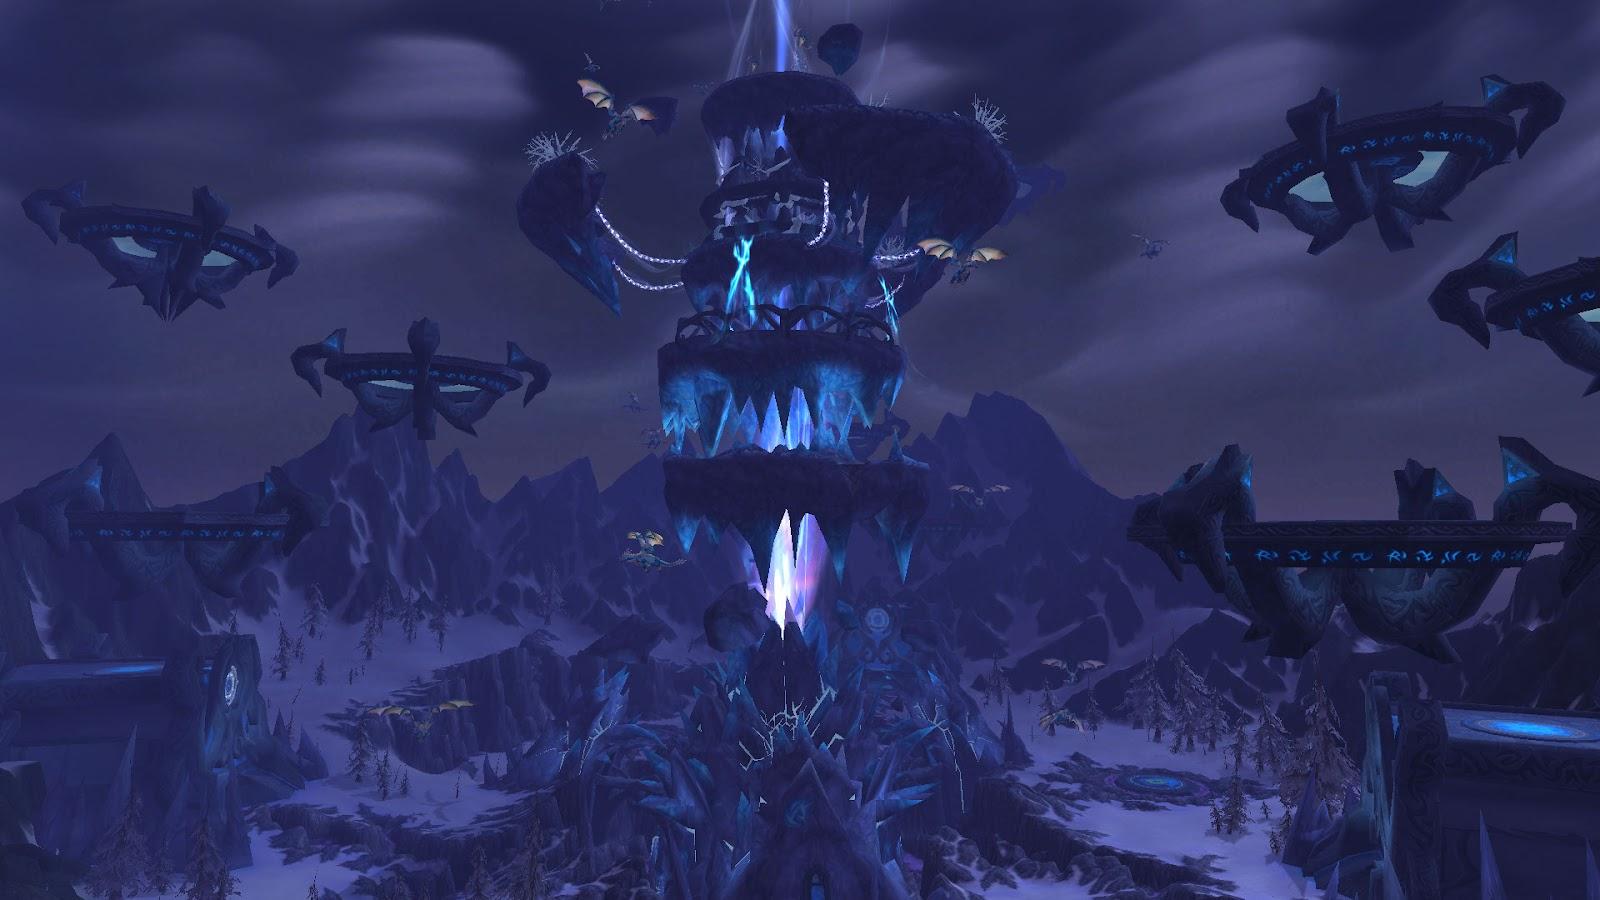 WOTLK 3.3.5 Client Download - Wrath of the Lich King Clien